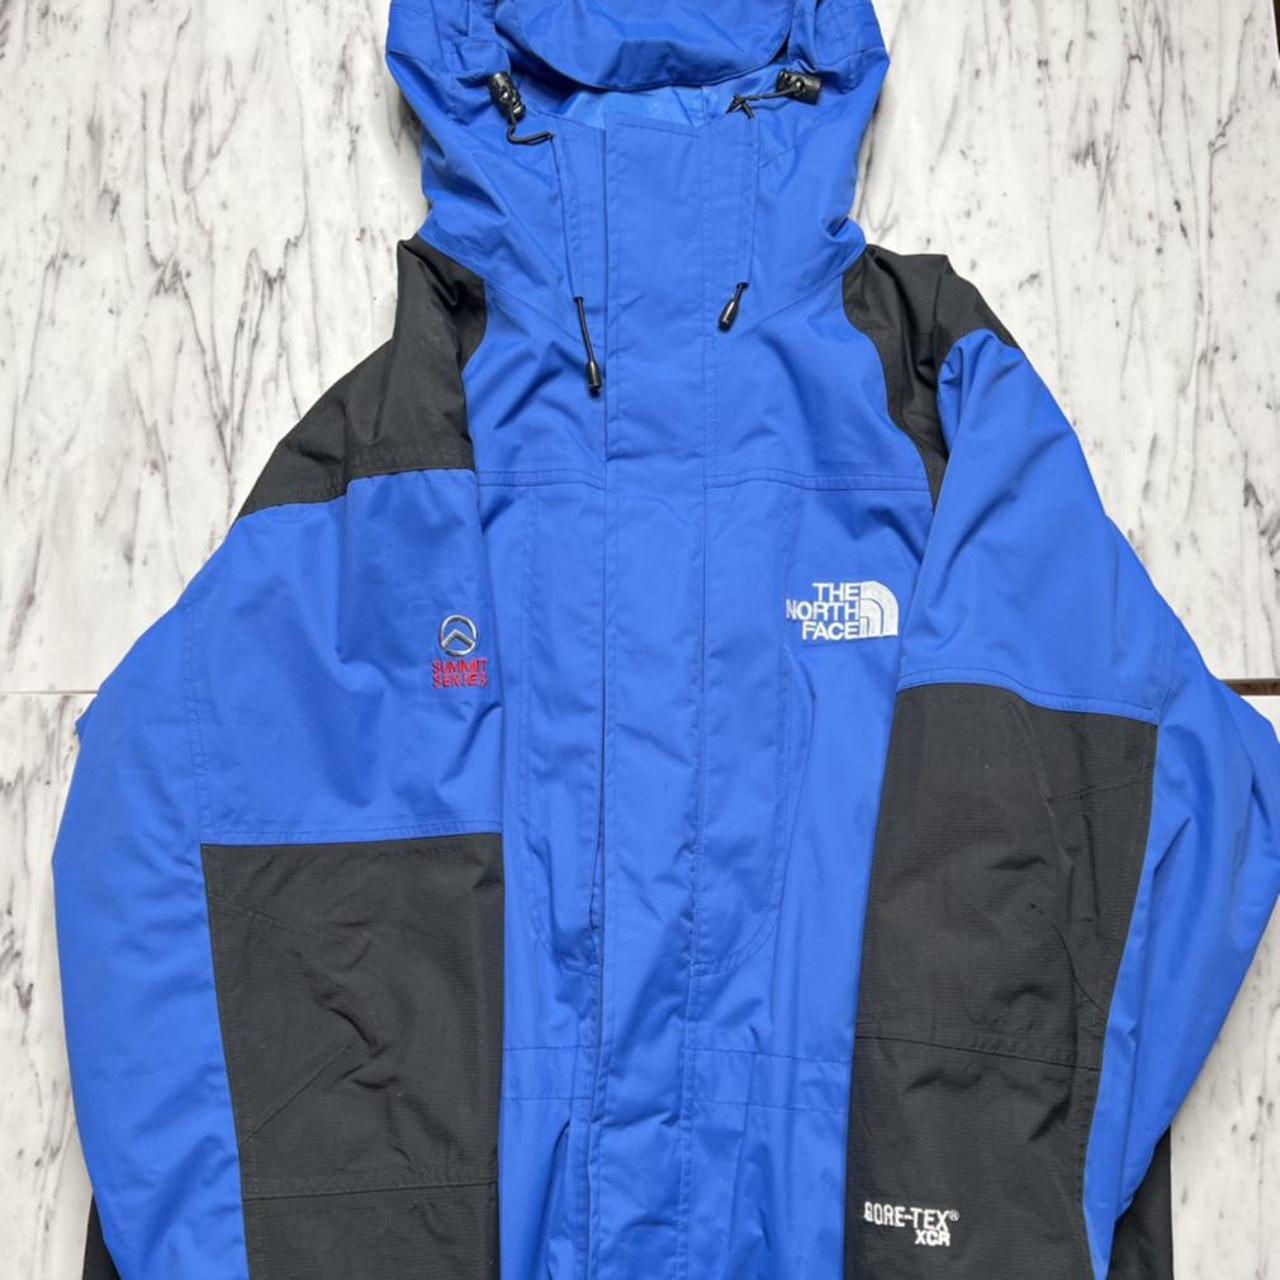 The North Face “740” Summit Series Gore-Tex - Depop